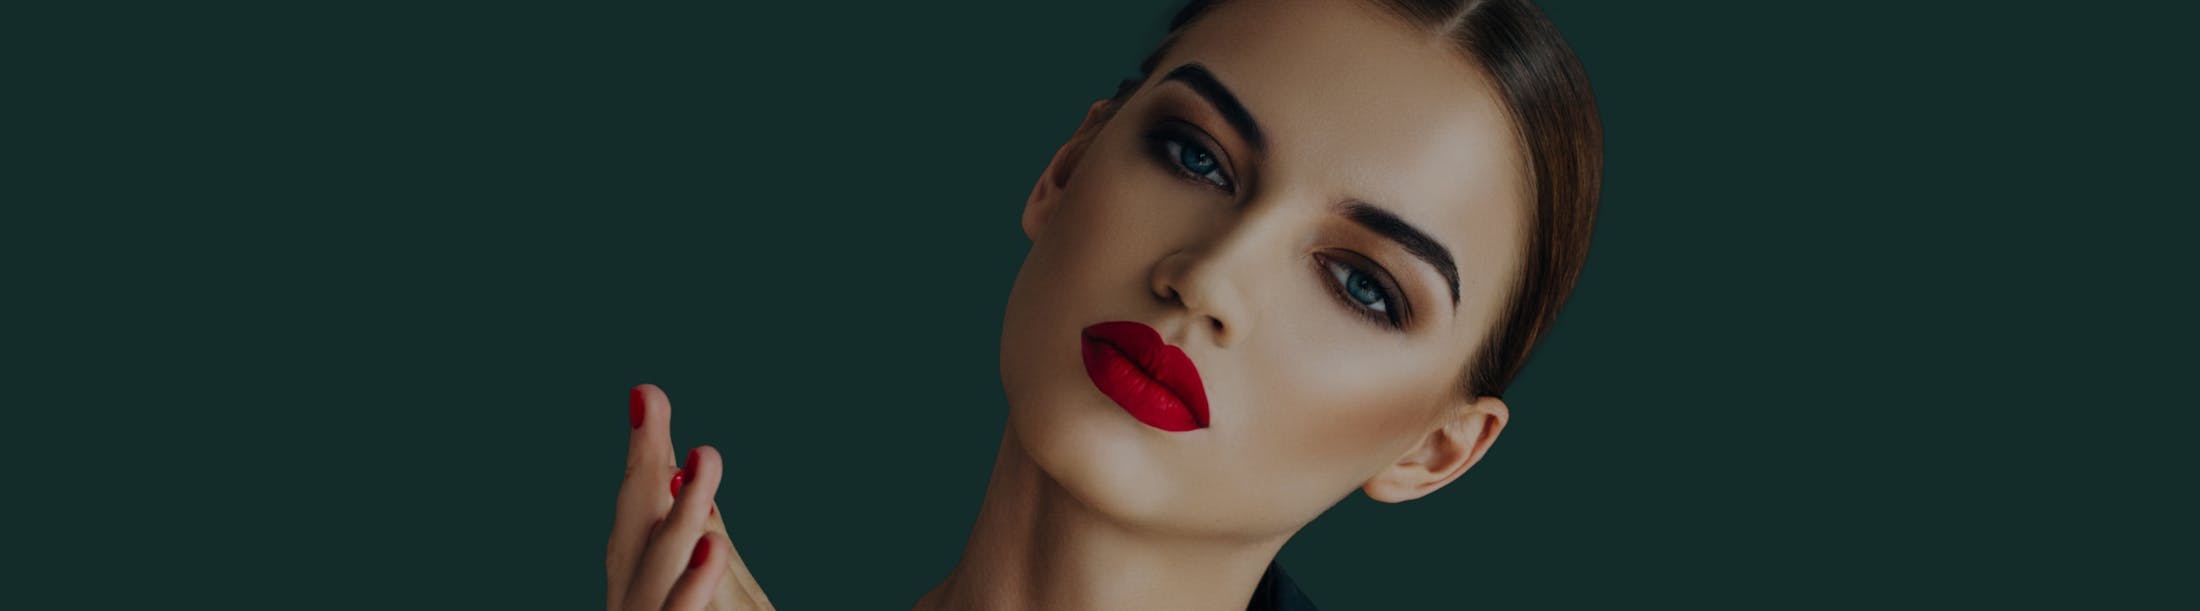 Glamorous woman withi red lips and dark eyebrows